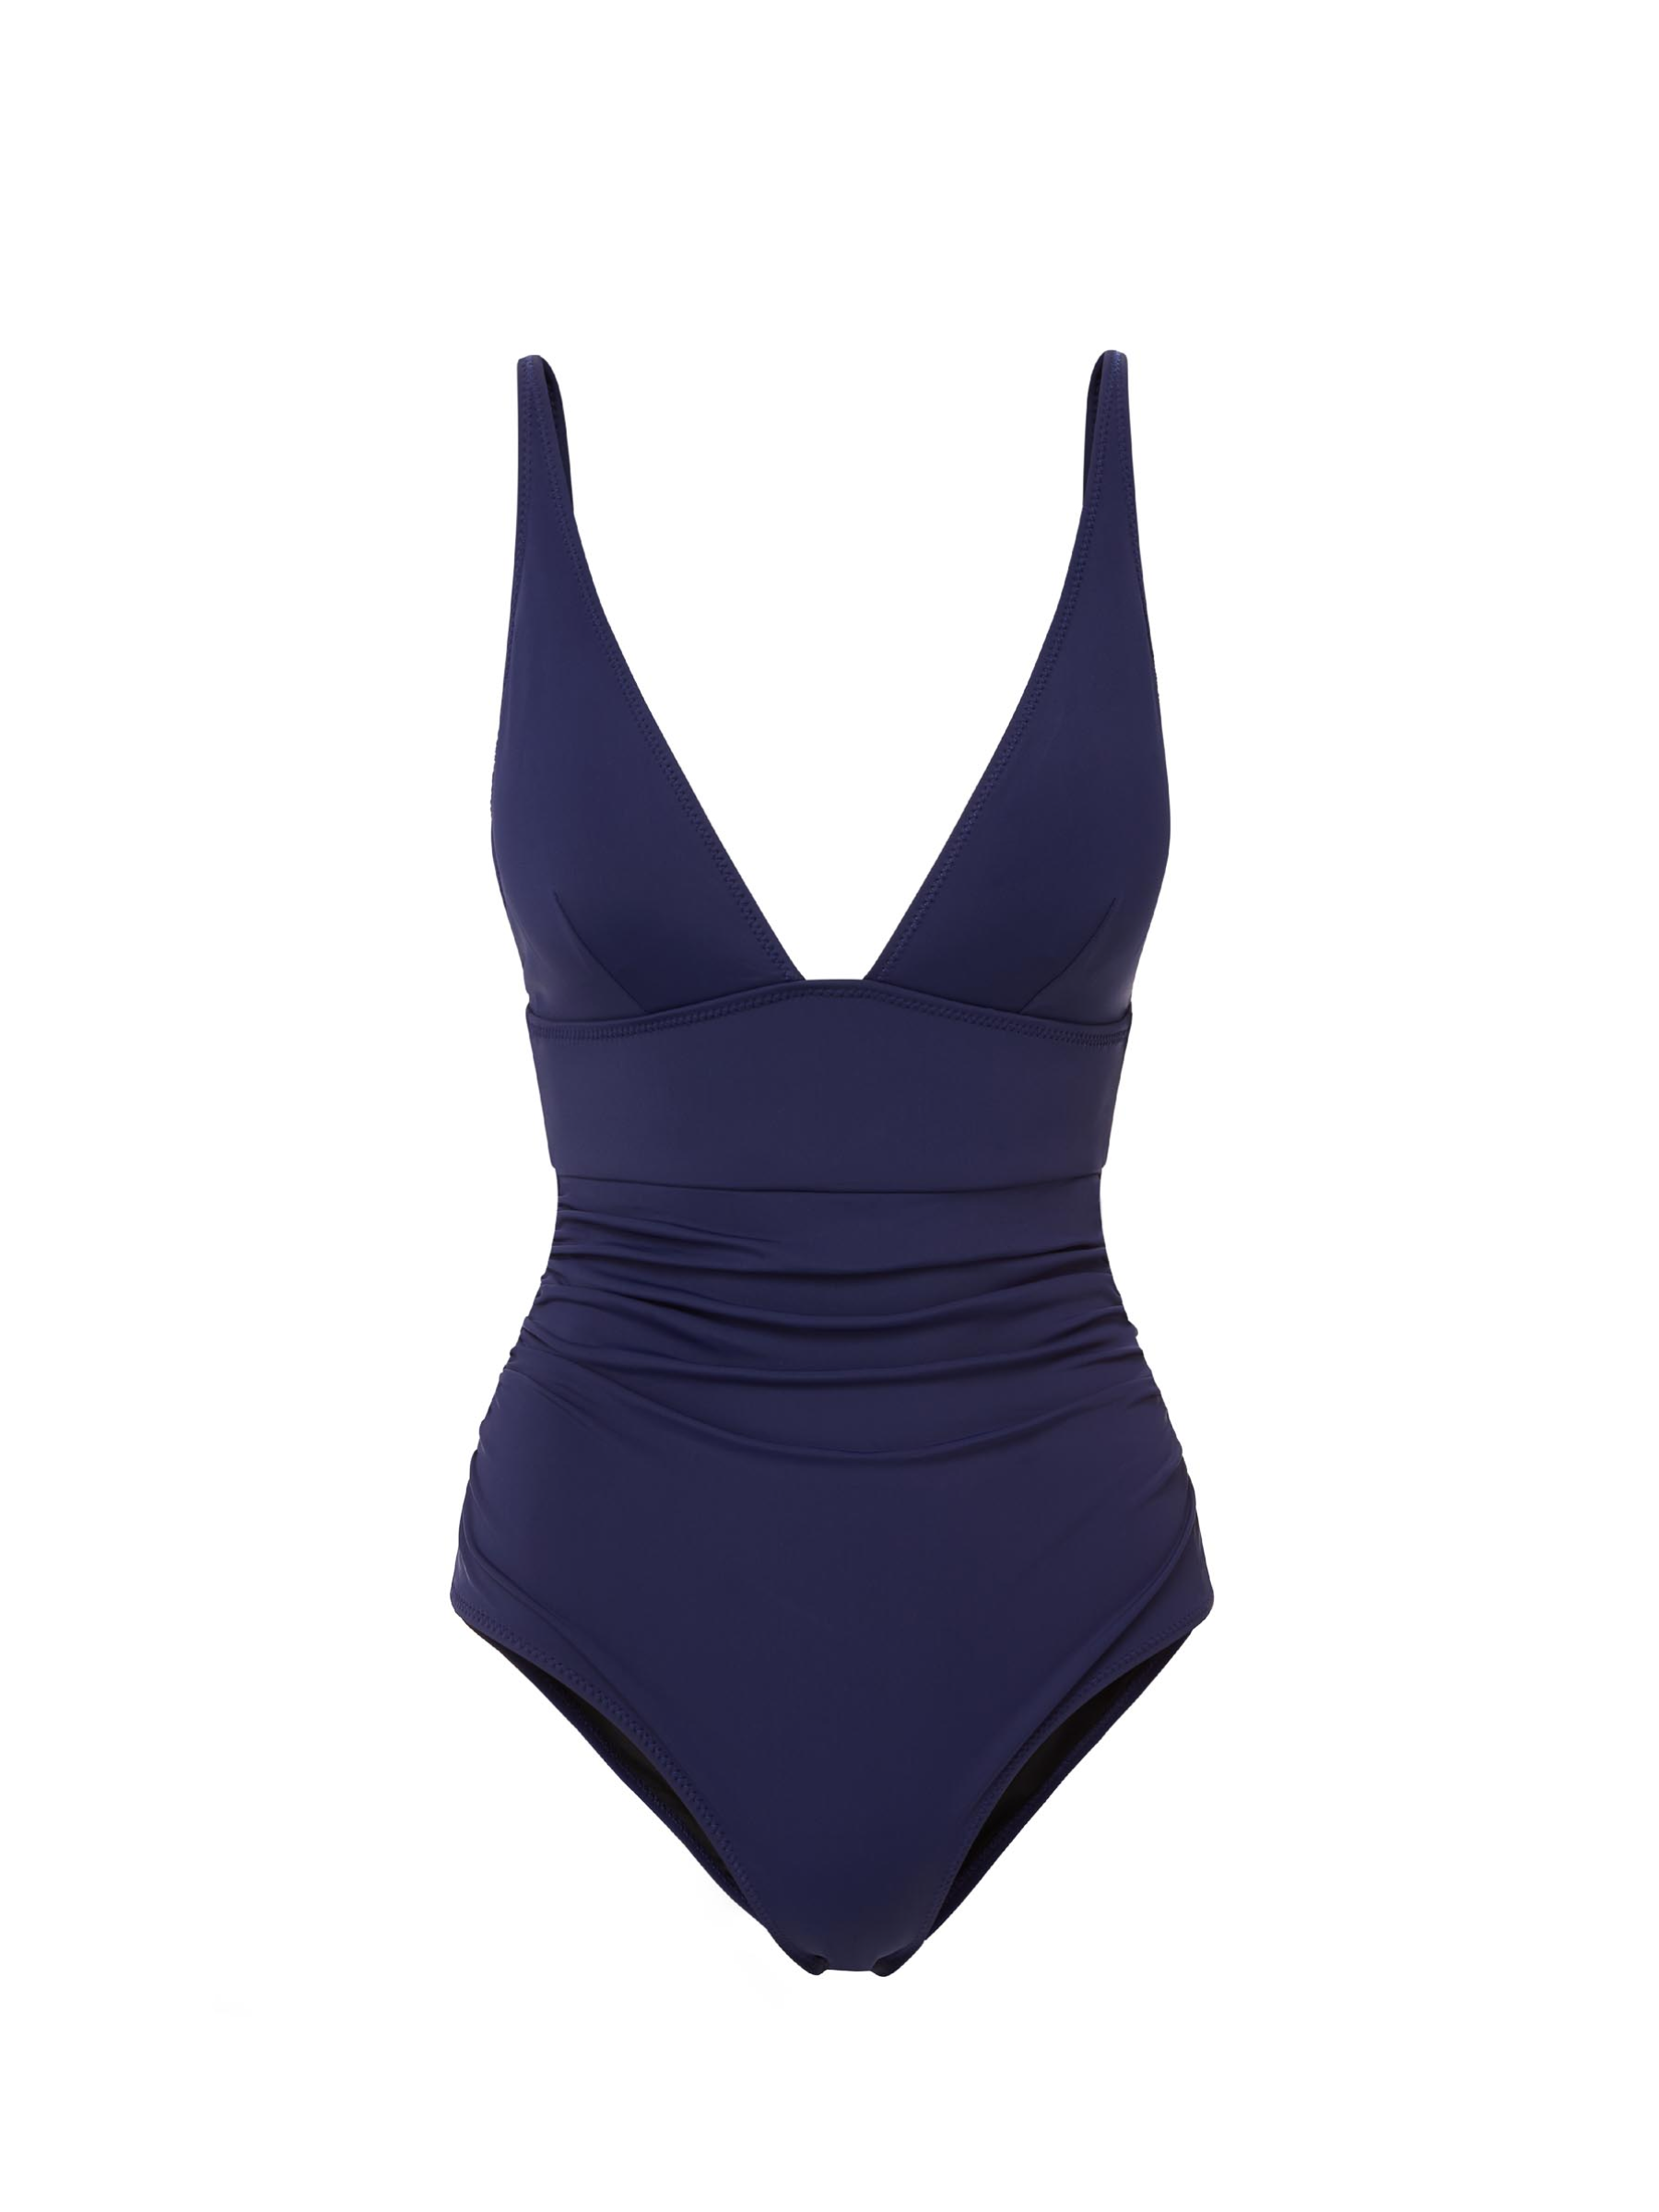 Niki One Piece in Navy | CHANGE OF SCENERY – Change of Scenery